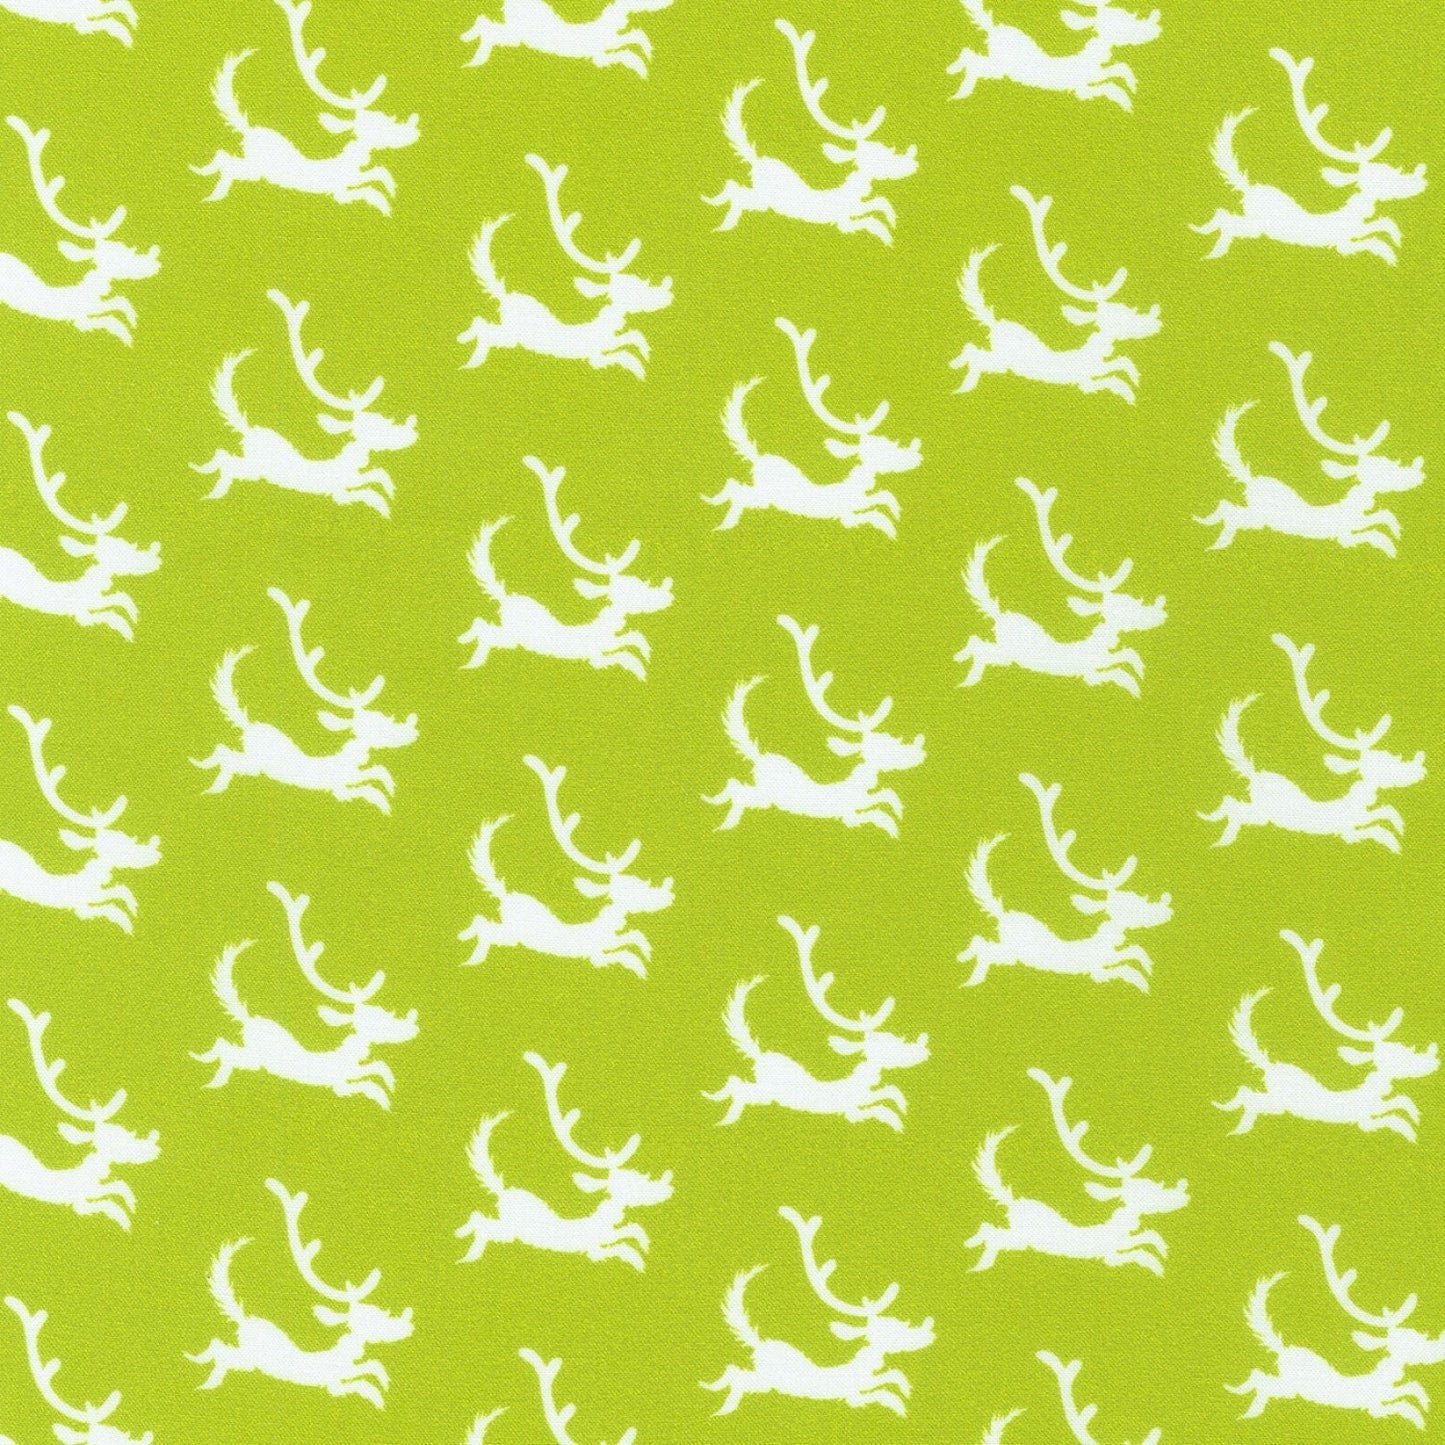 Robert Kaufman Grinch Fabric - Lime Dogs - How the Grinch Stole Christmas - 100% cotton - Reindeer fabric Max Dog Fabric - Ships NEXT DAY